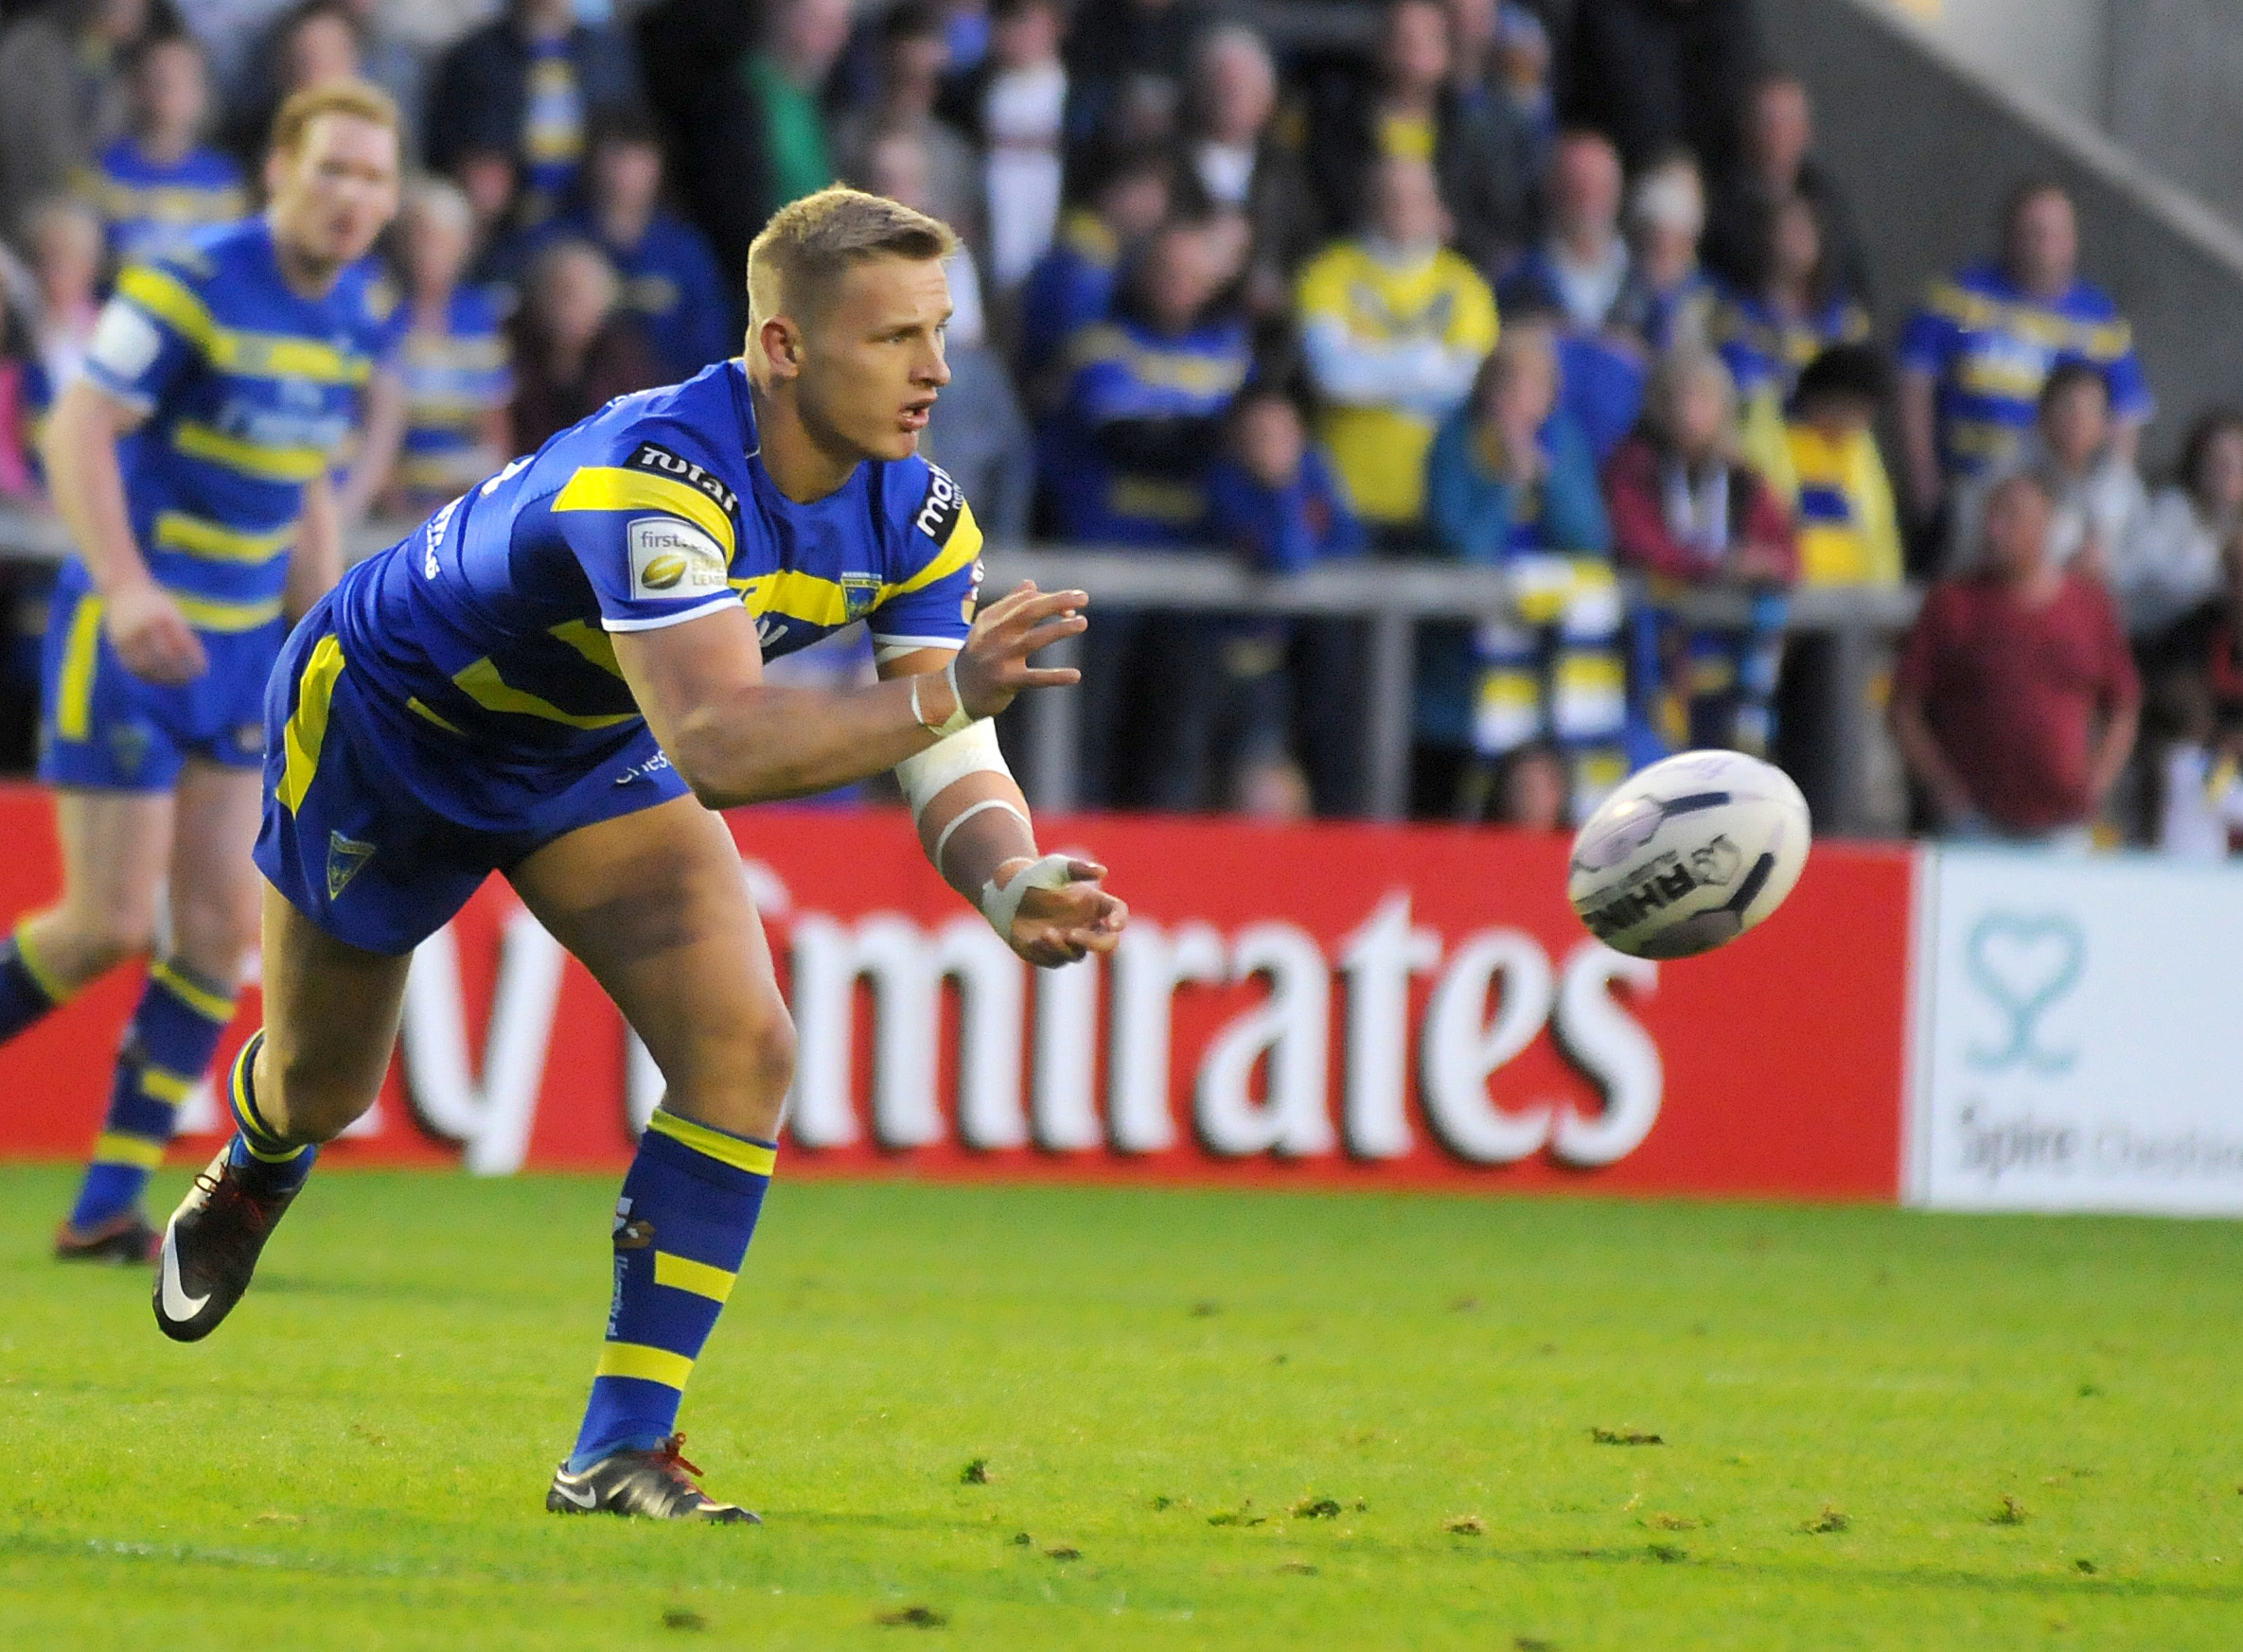 Brad Dwyer made 88 first-team appearances and is a key part of the current Leeds Rhinos side. Picture by Mike Boden